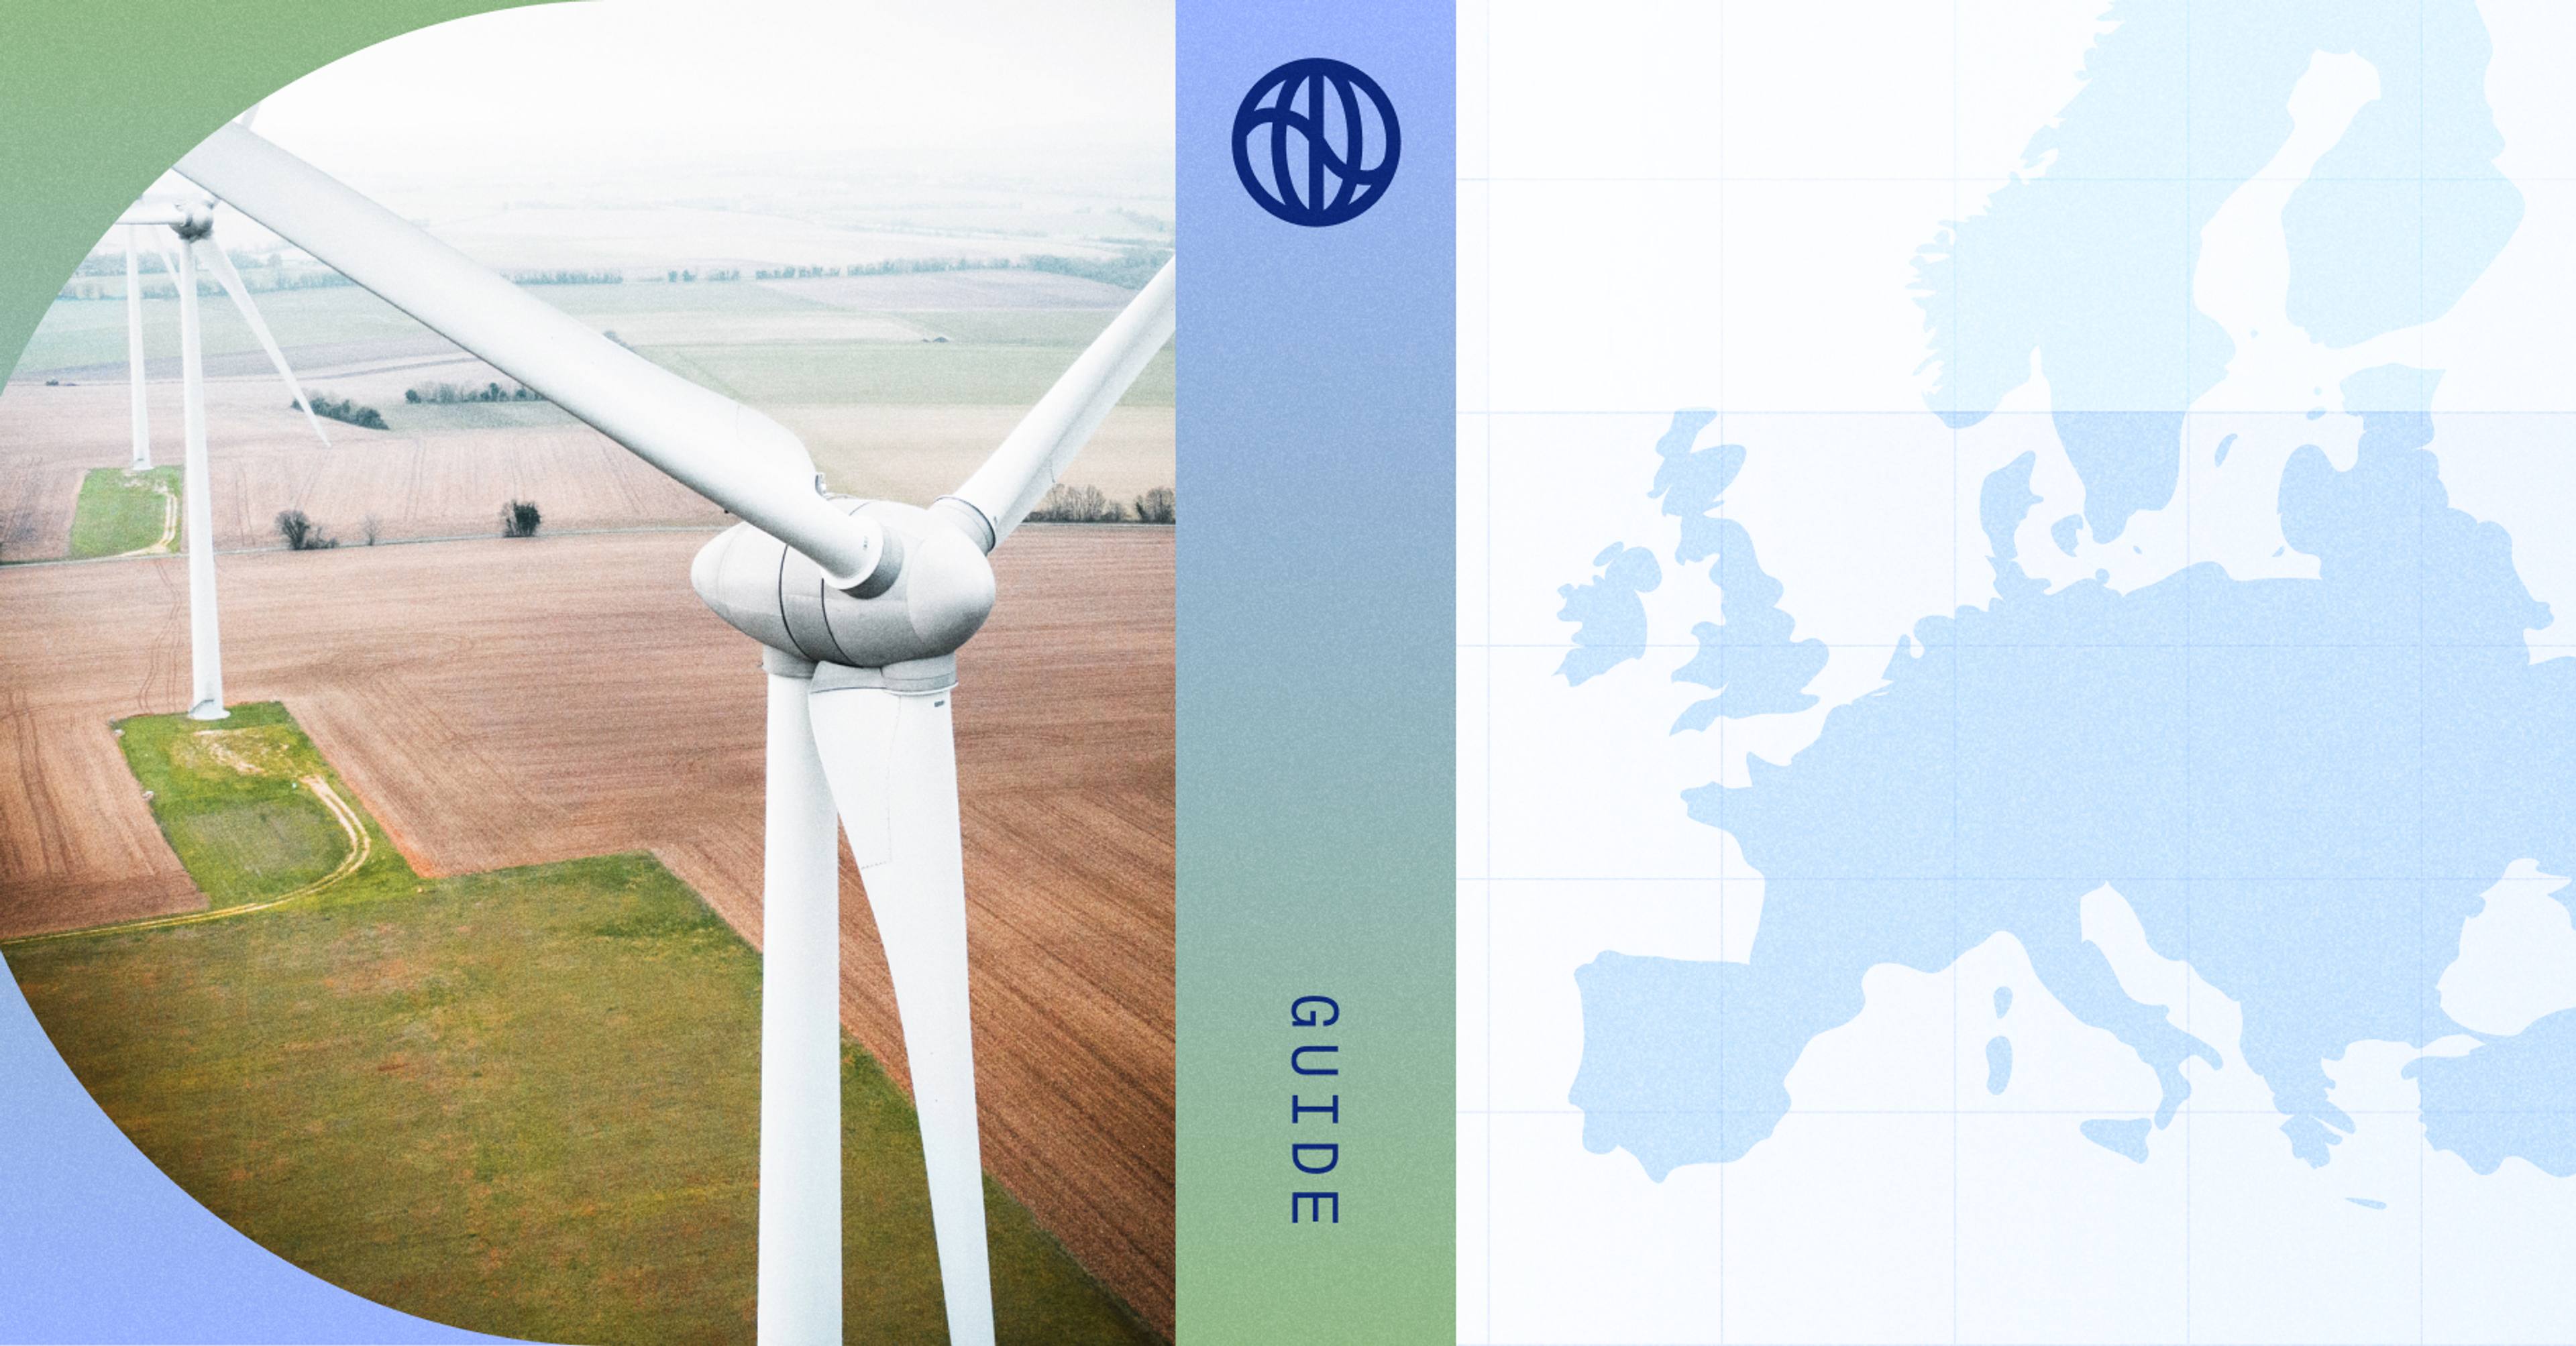 A collage showing a close-up of wind turbines in a row laid out in perspective on a vast field of grass and dirt, paired with a vectorized map of Europe